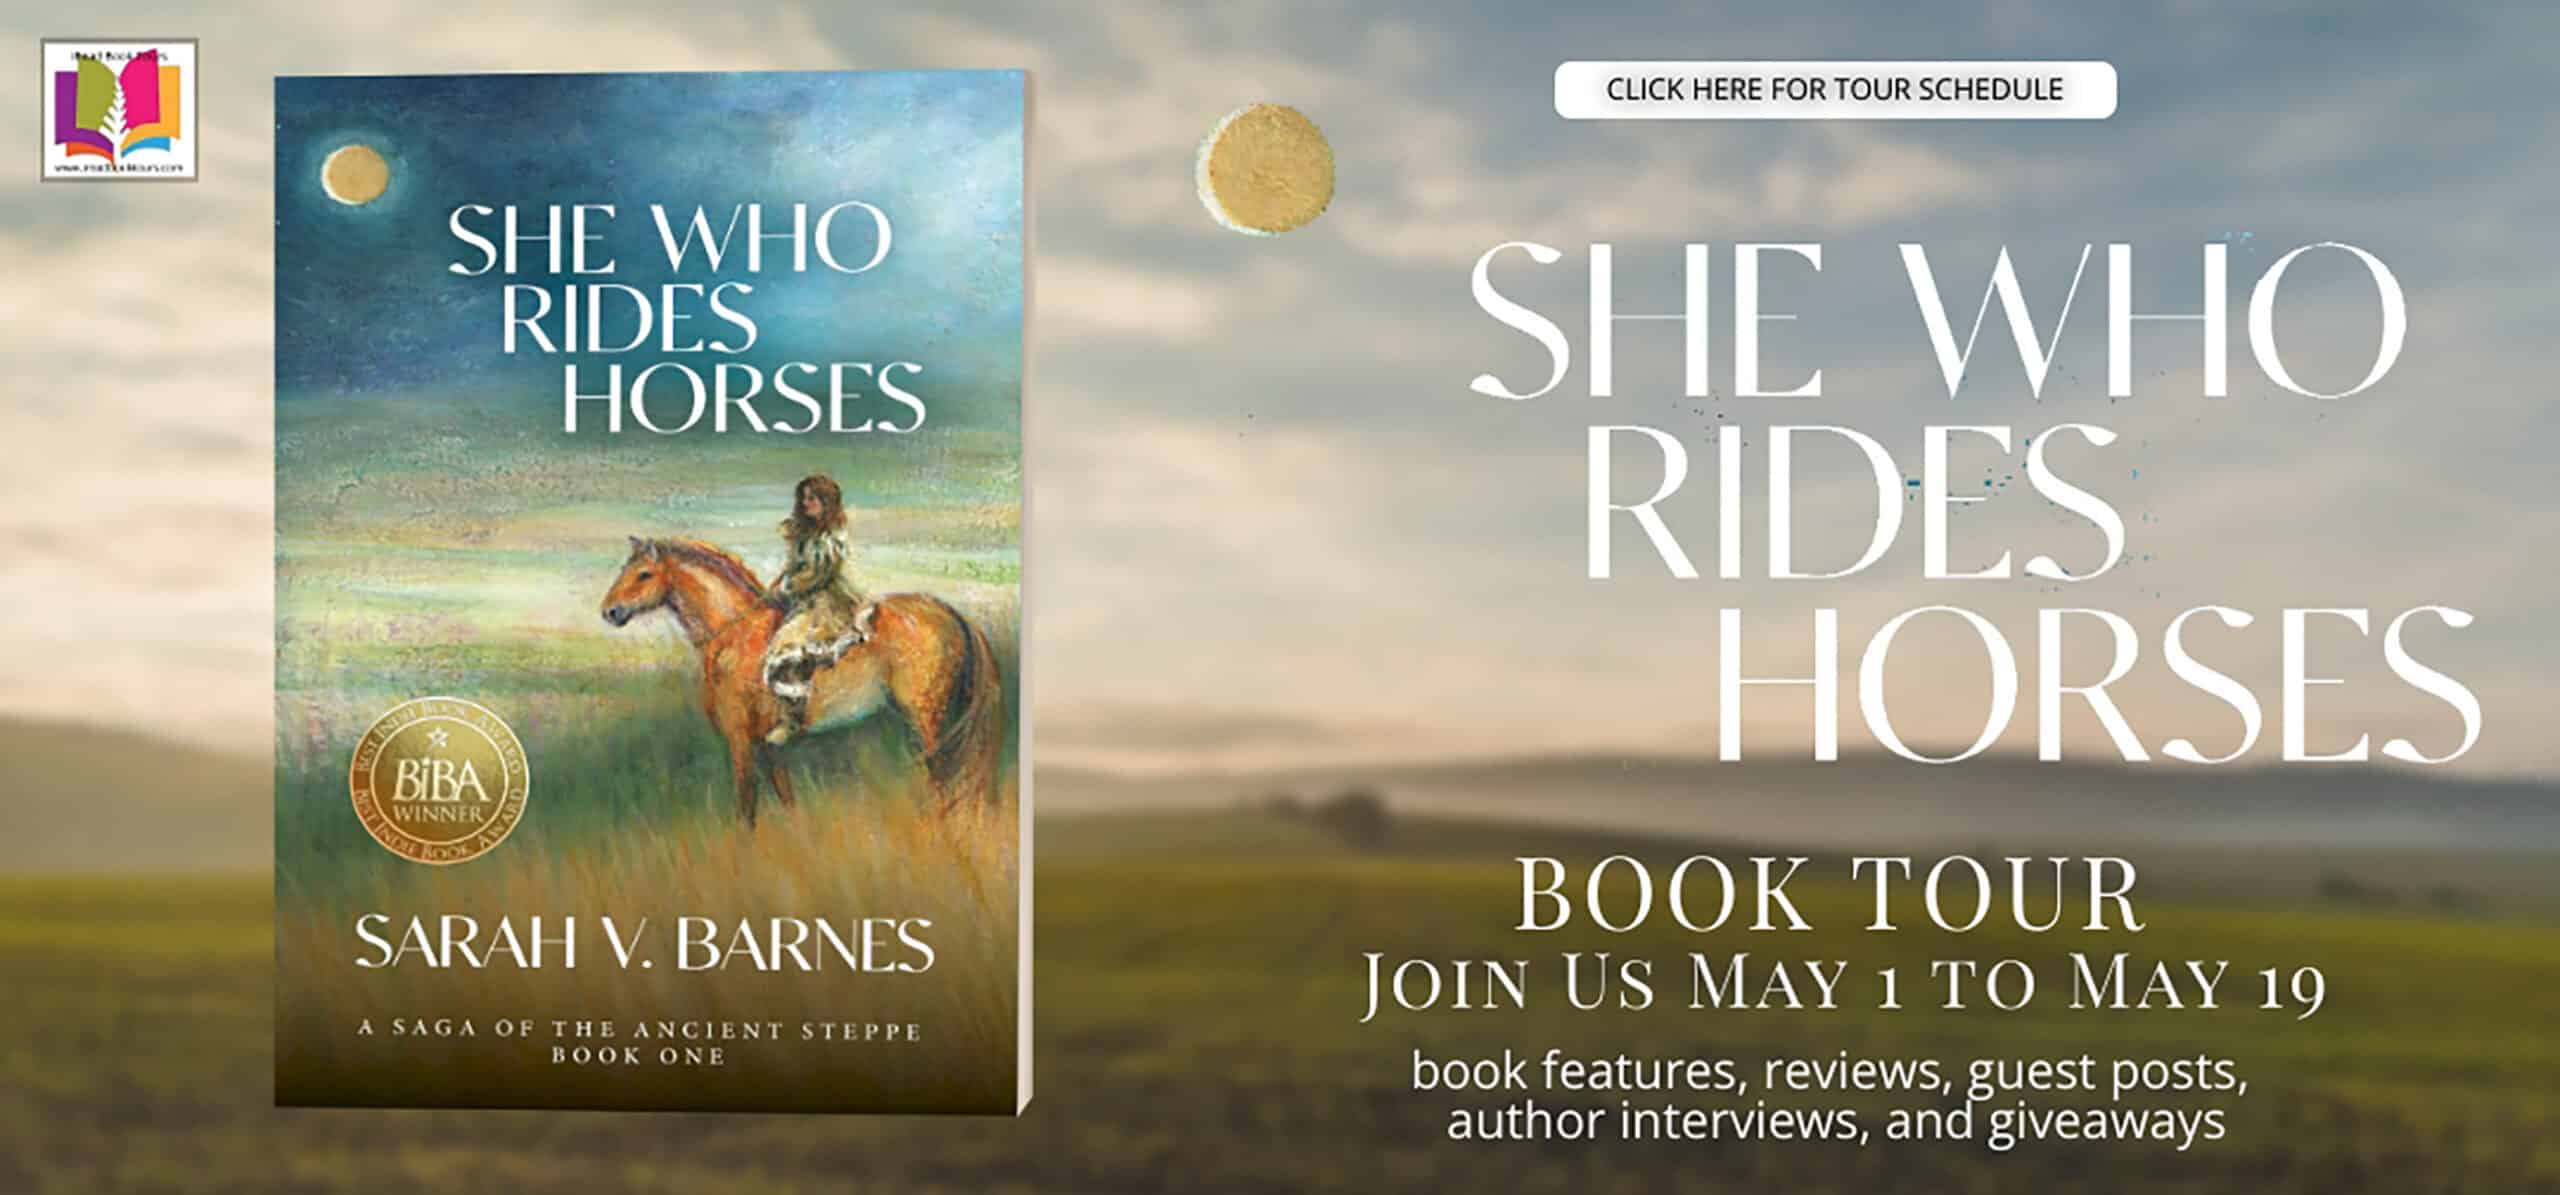 She Who Rides Horses: A Saga of the Ancient Steppe (Book 1) by Sarah V. Barnes | Book Review ~ Excerpt ~ Trailer ~ Inspiration from Author ~ Giveaway